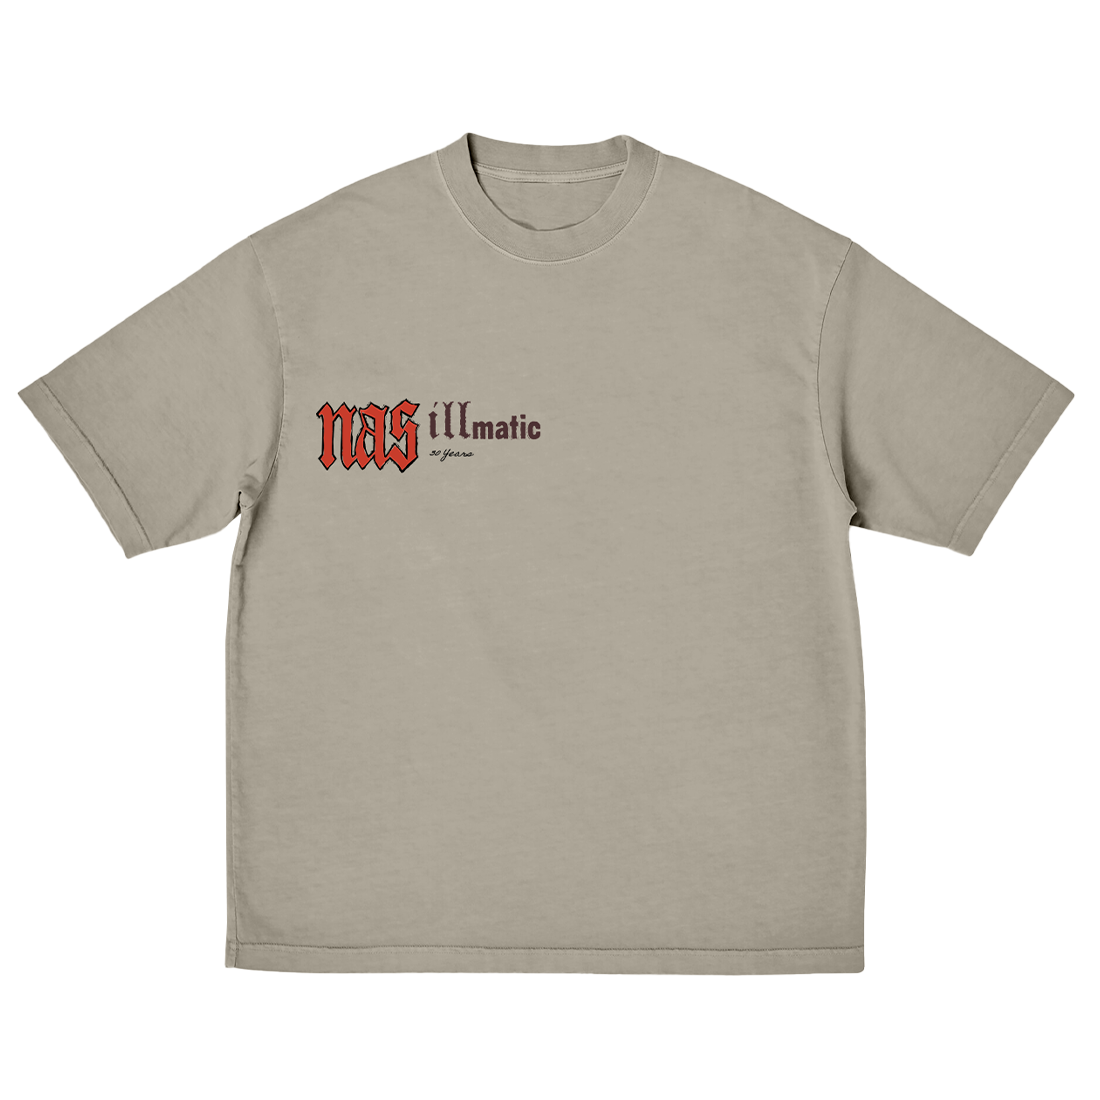 Graphic t-shirt with &quot;Nas Illmatic&quot; album text on the chest